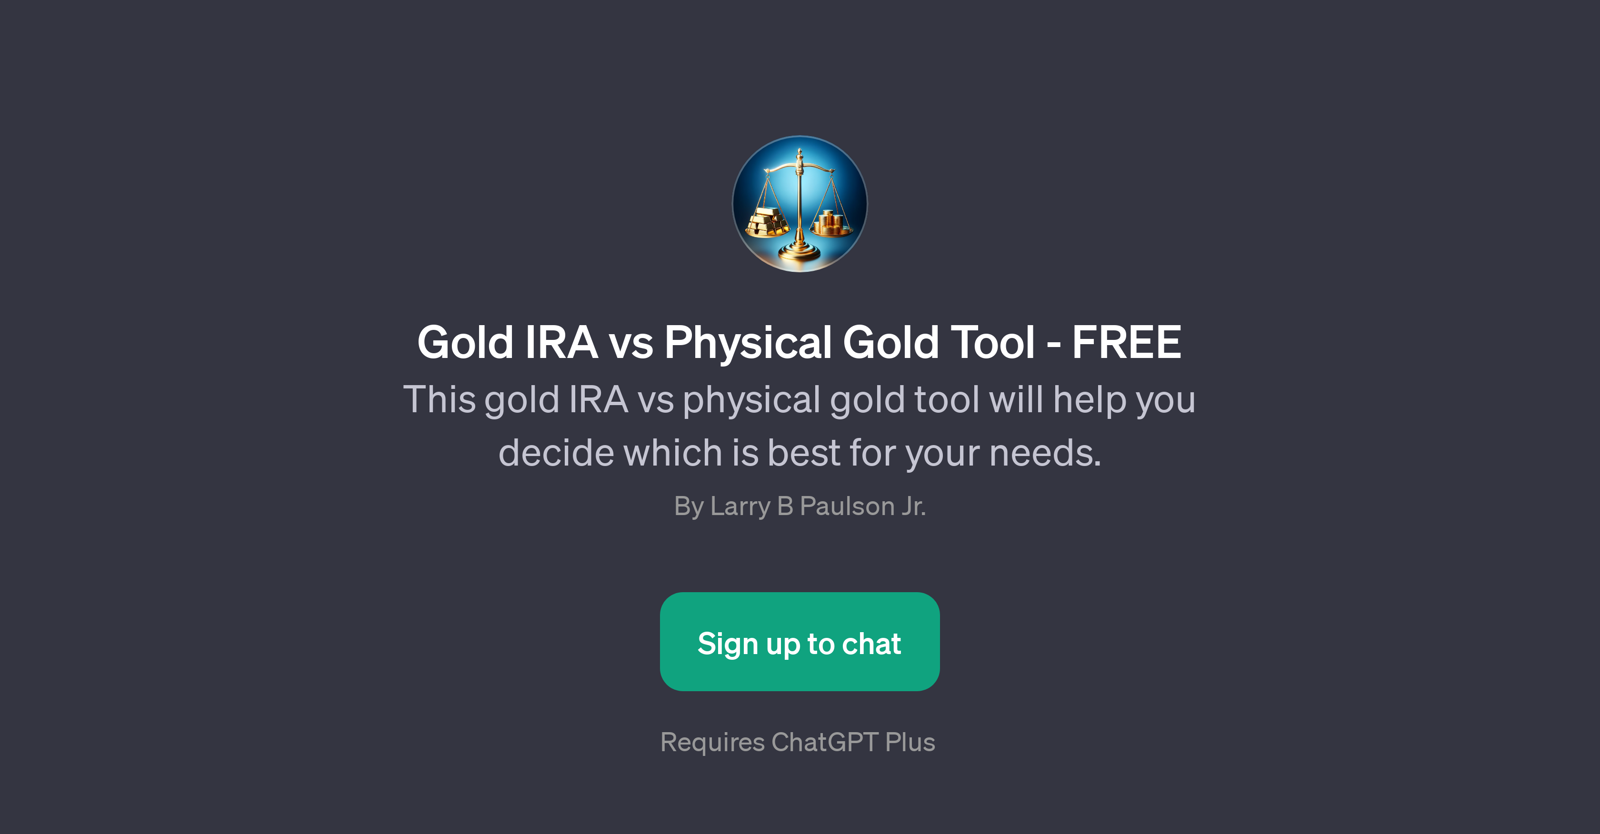 Gold IRA vs Physical Gold Tool website